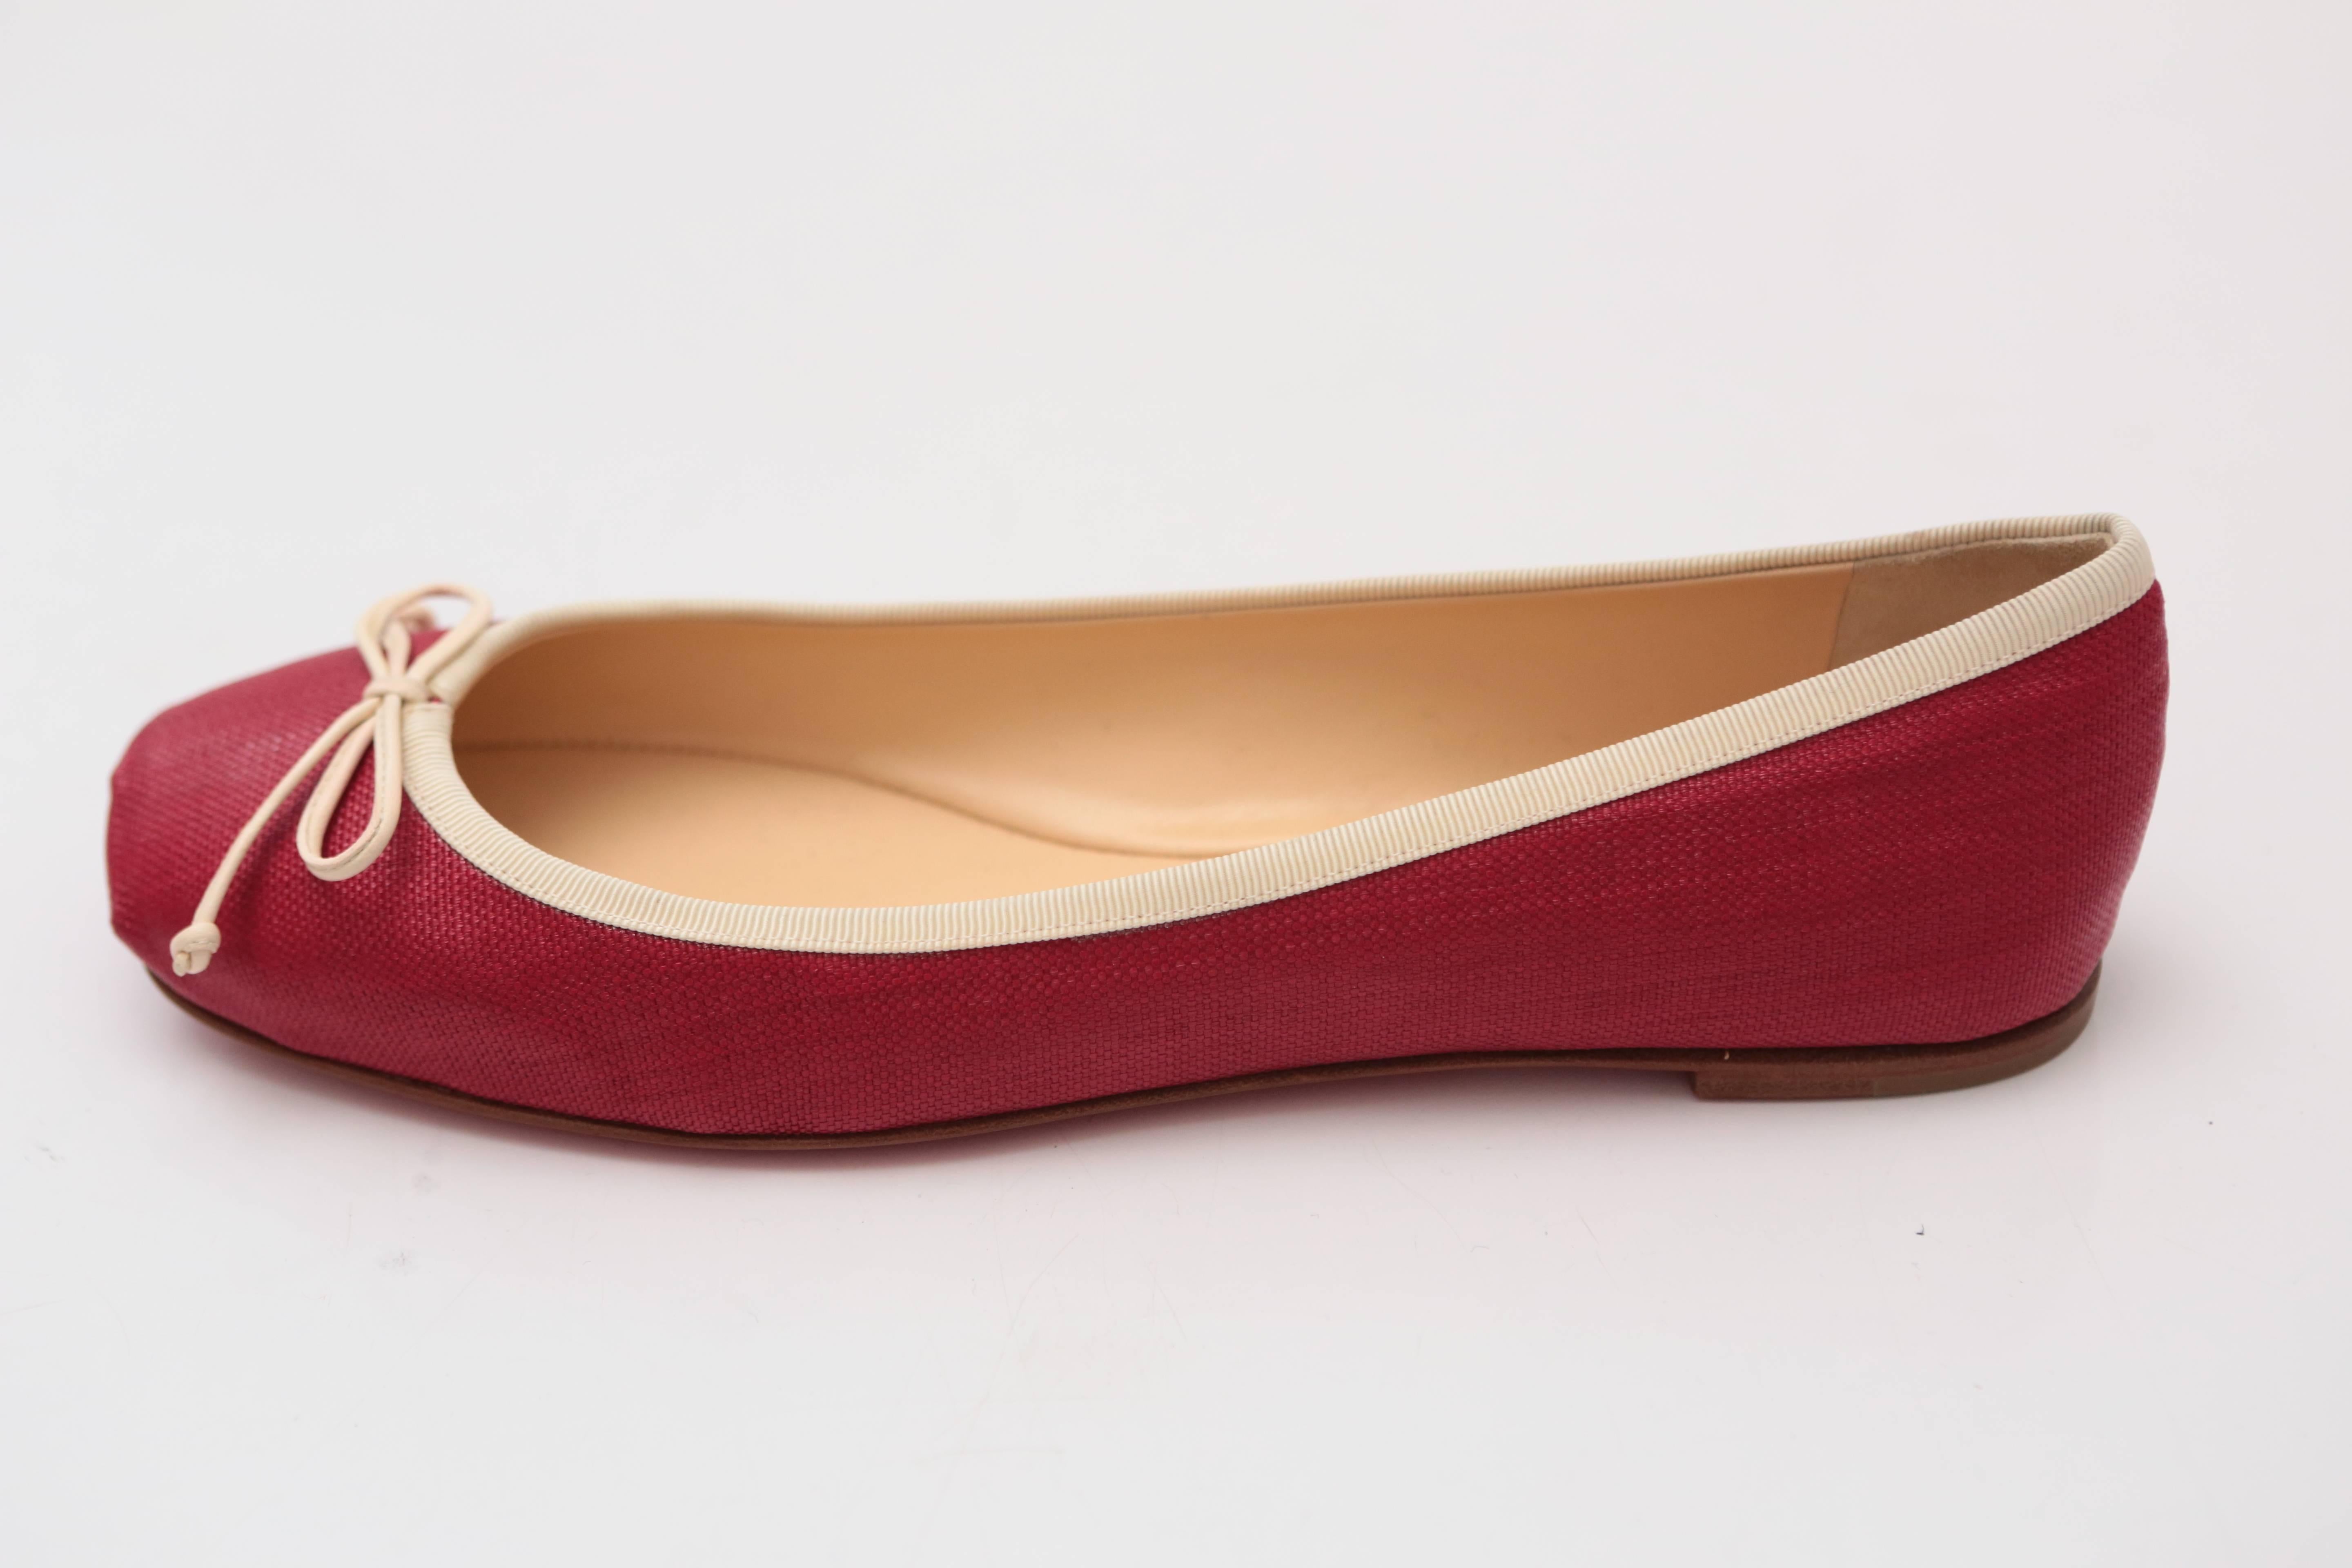 Classic Rougue linen flats with white piping. A classic option for a sophisticated person!